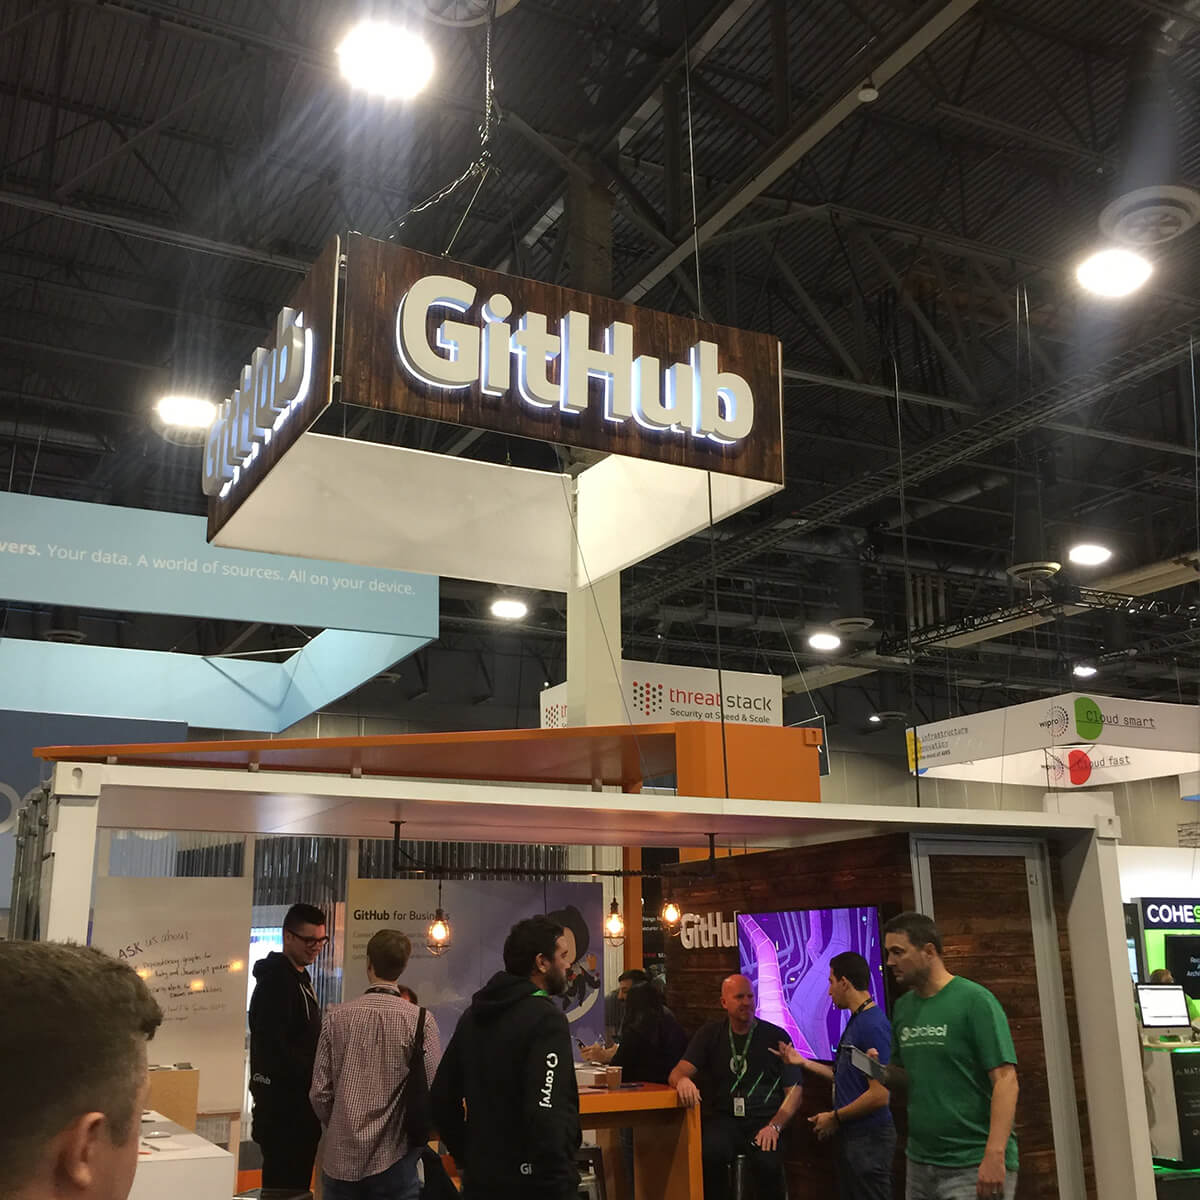 Github booth at re:invent expo